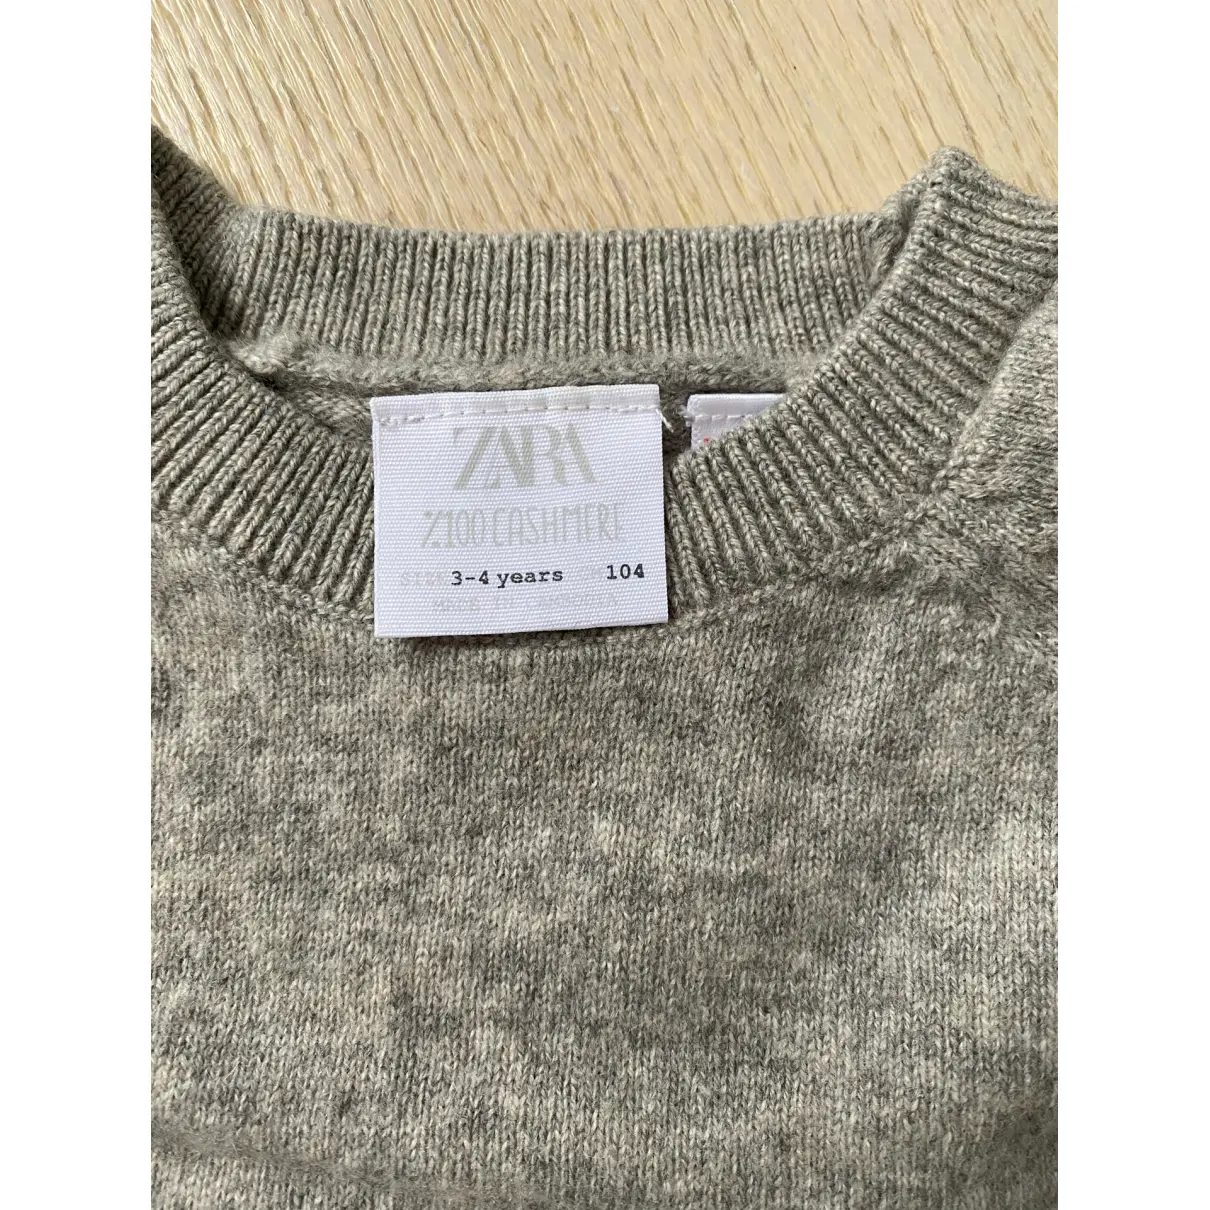 Buy Zara Cashmere outfit online